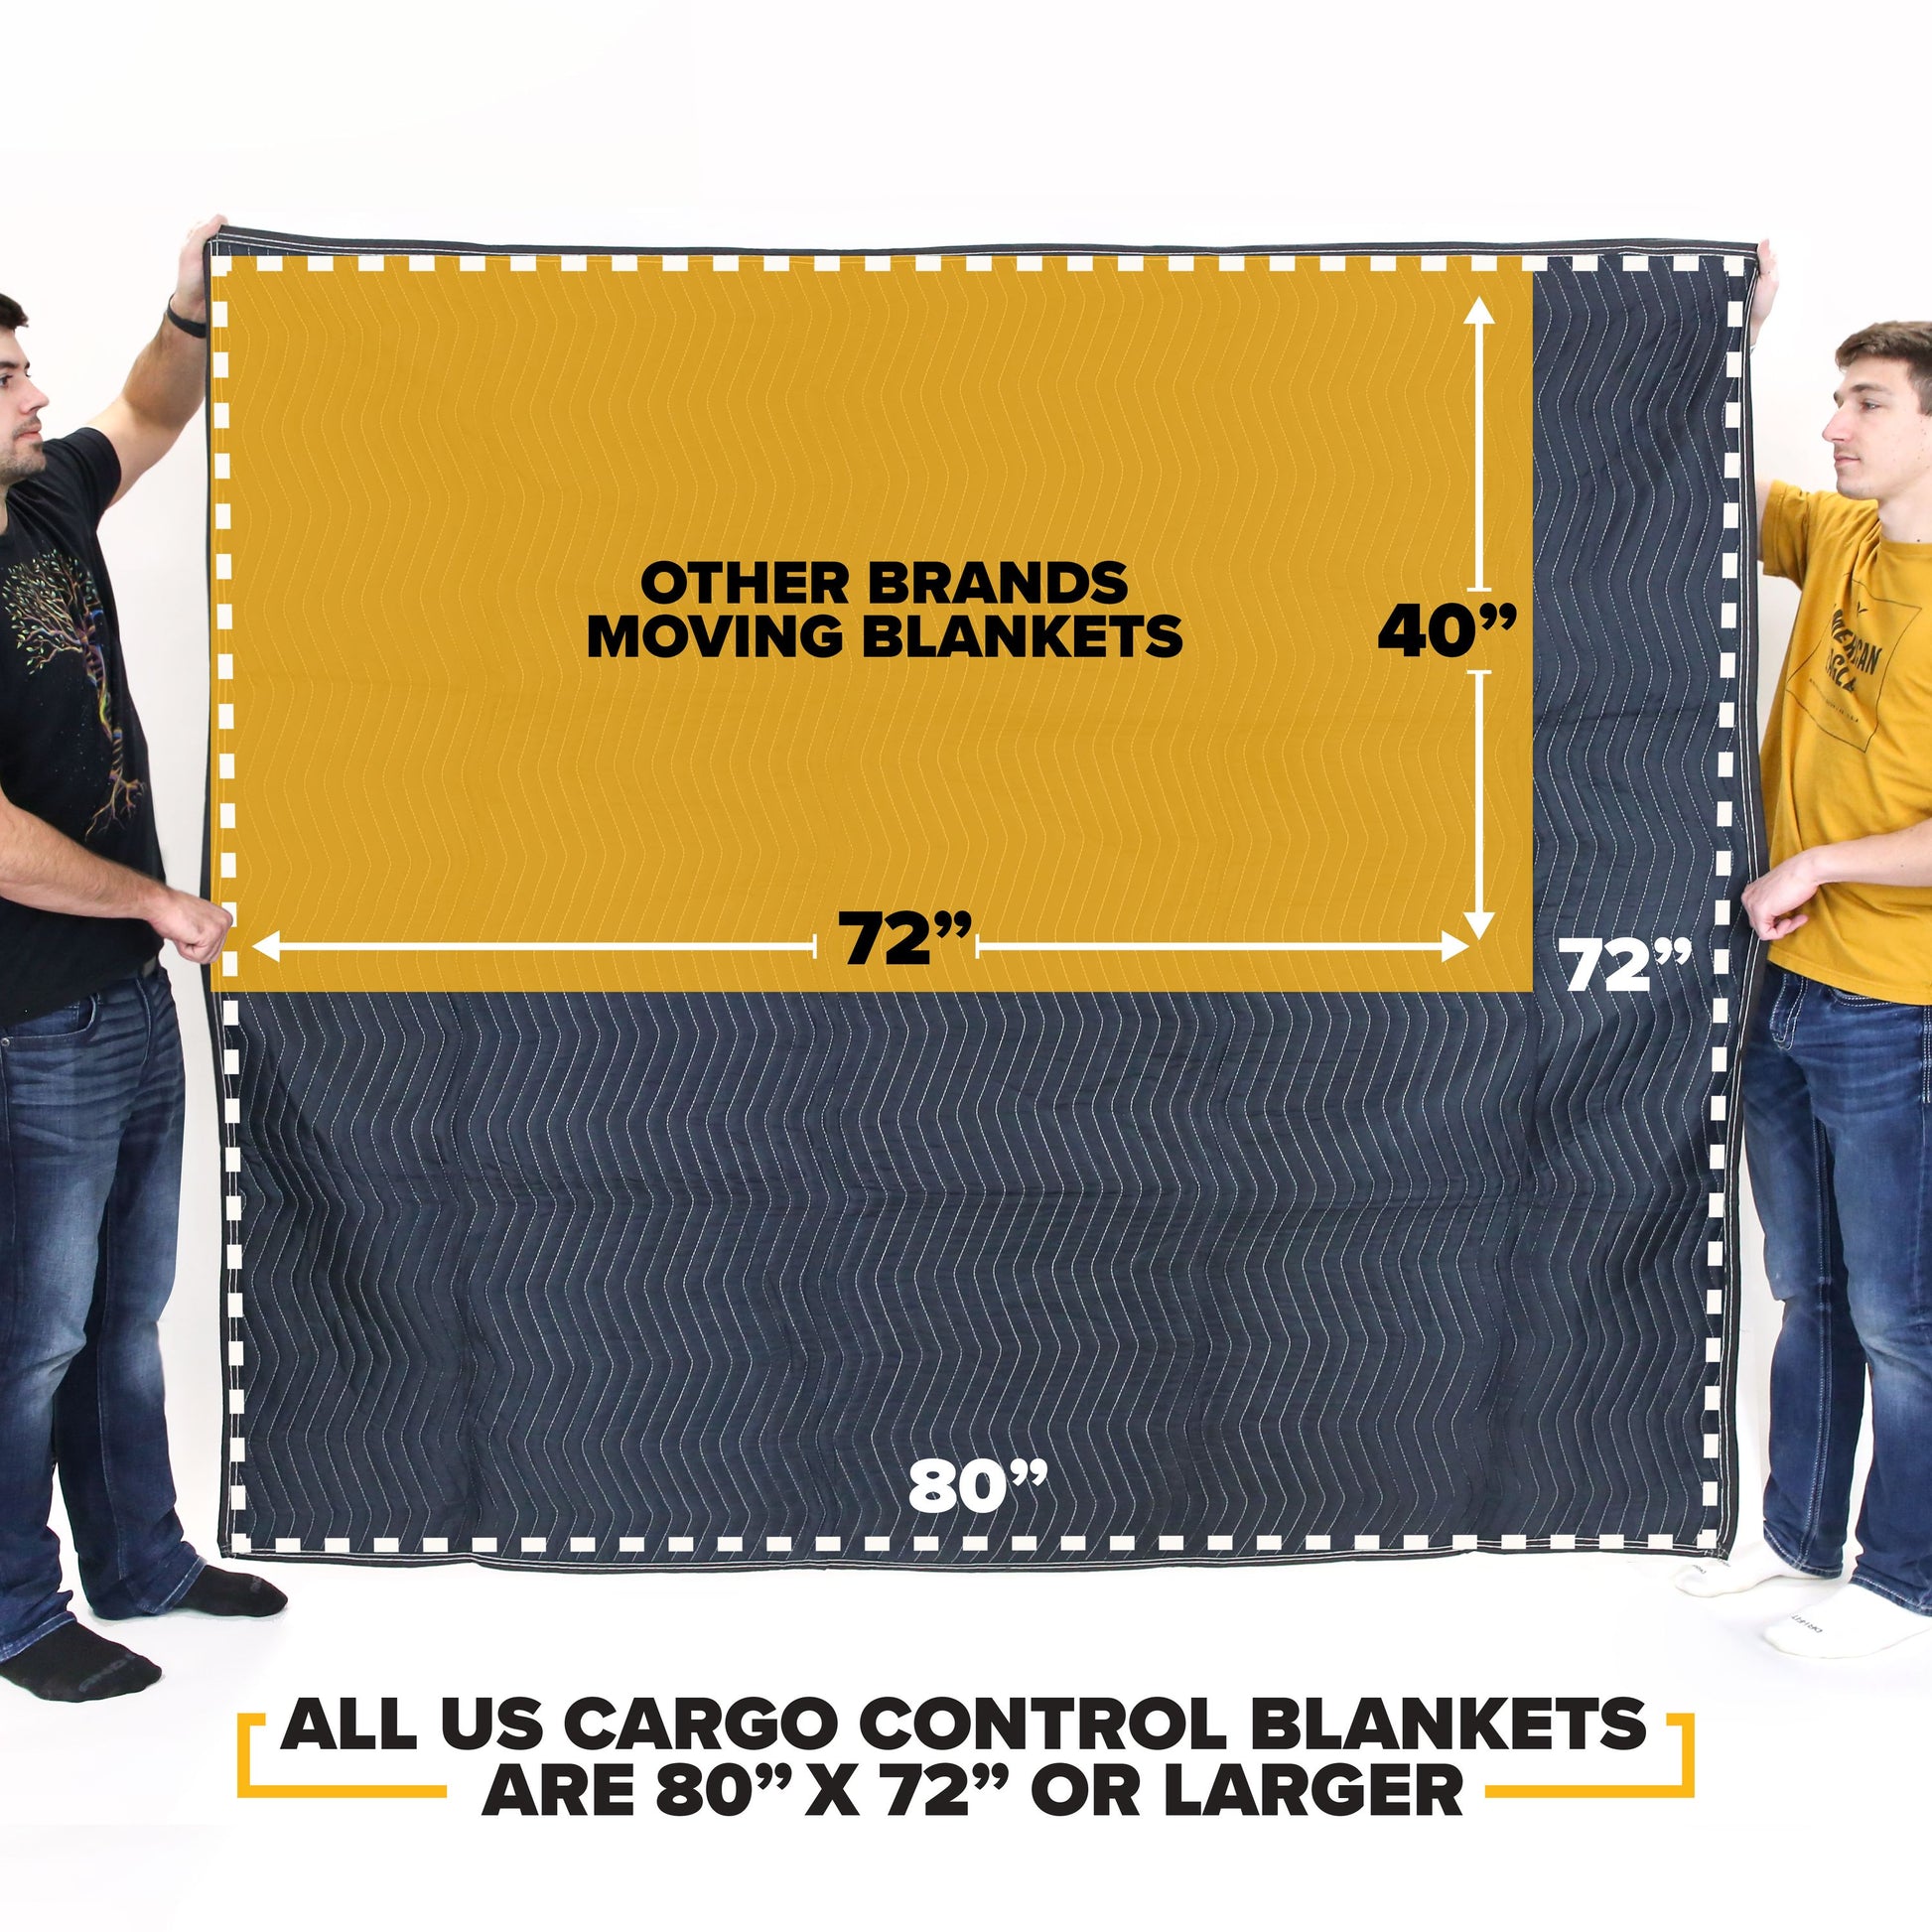 Moving Blankets- Multi Mover 4-Pack image 4 of 11